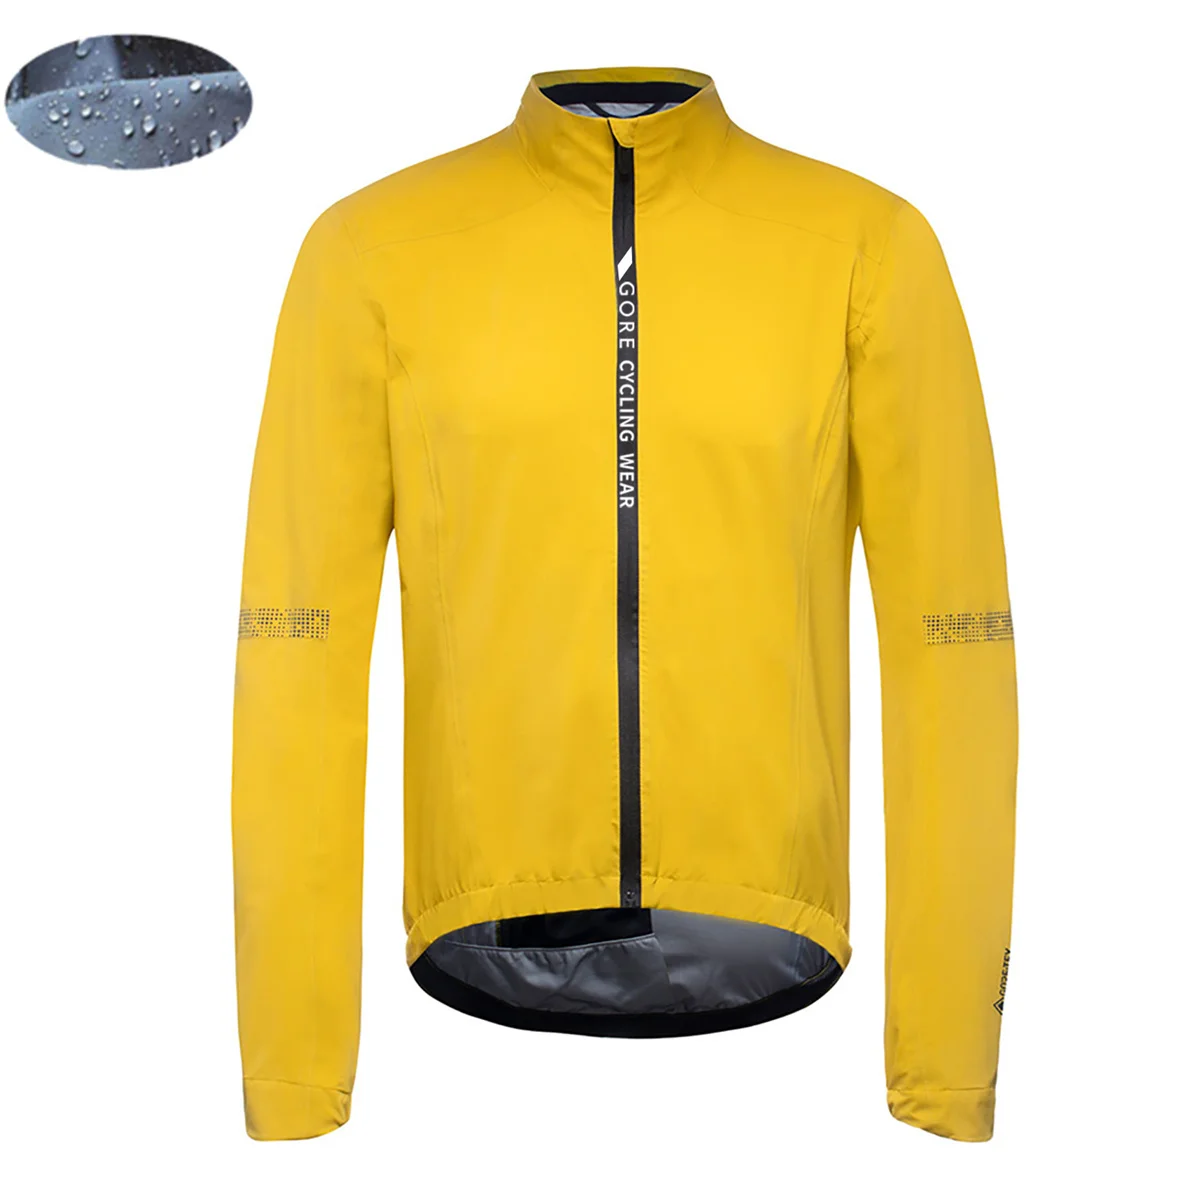 GORE Cycling Wear Windproof Cycling Jackets Outdoor Wind Rain Clothes Men Bicycle Raincoat MTB Cycling Clothing Road Bike Jersey